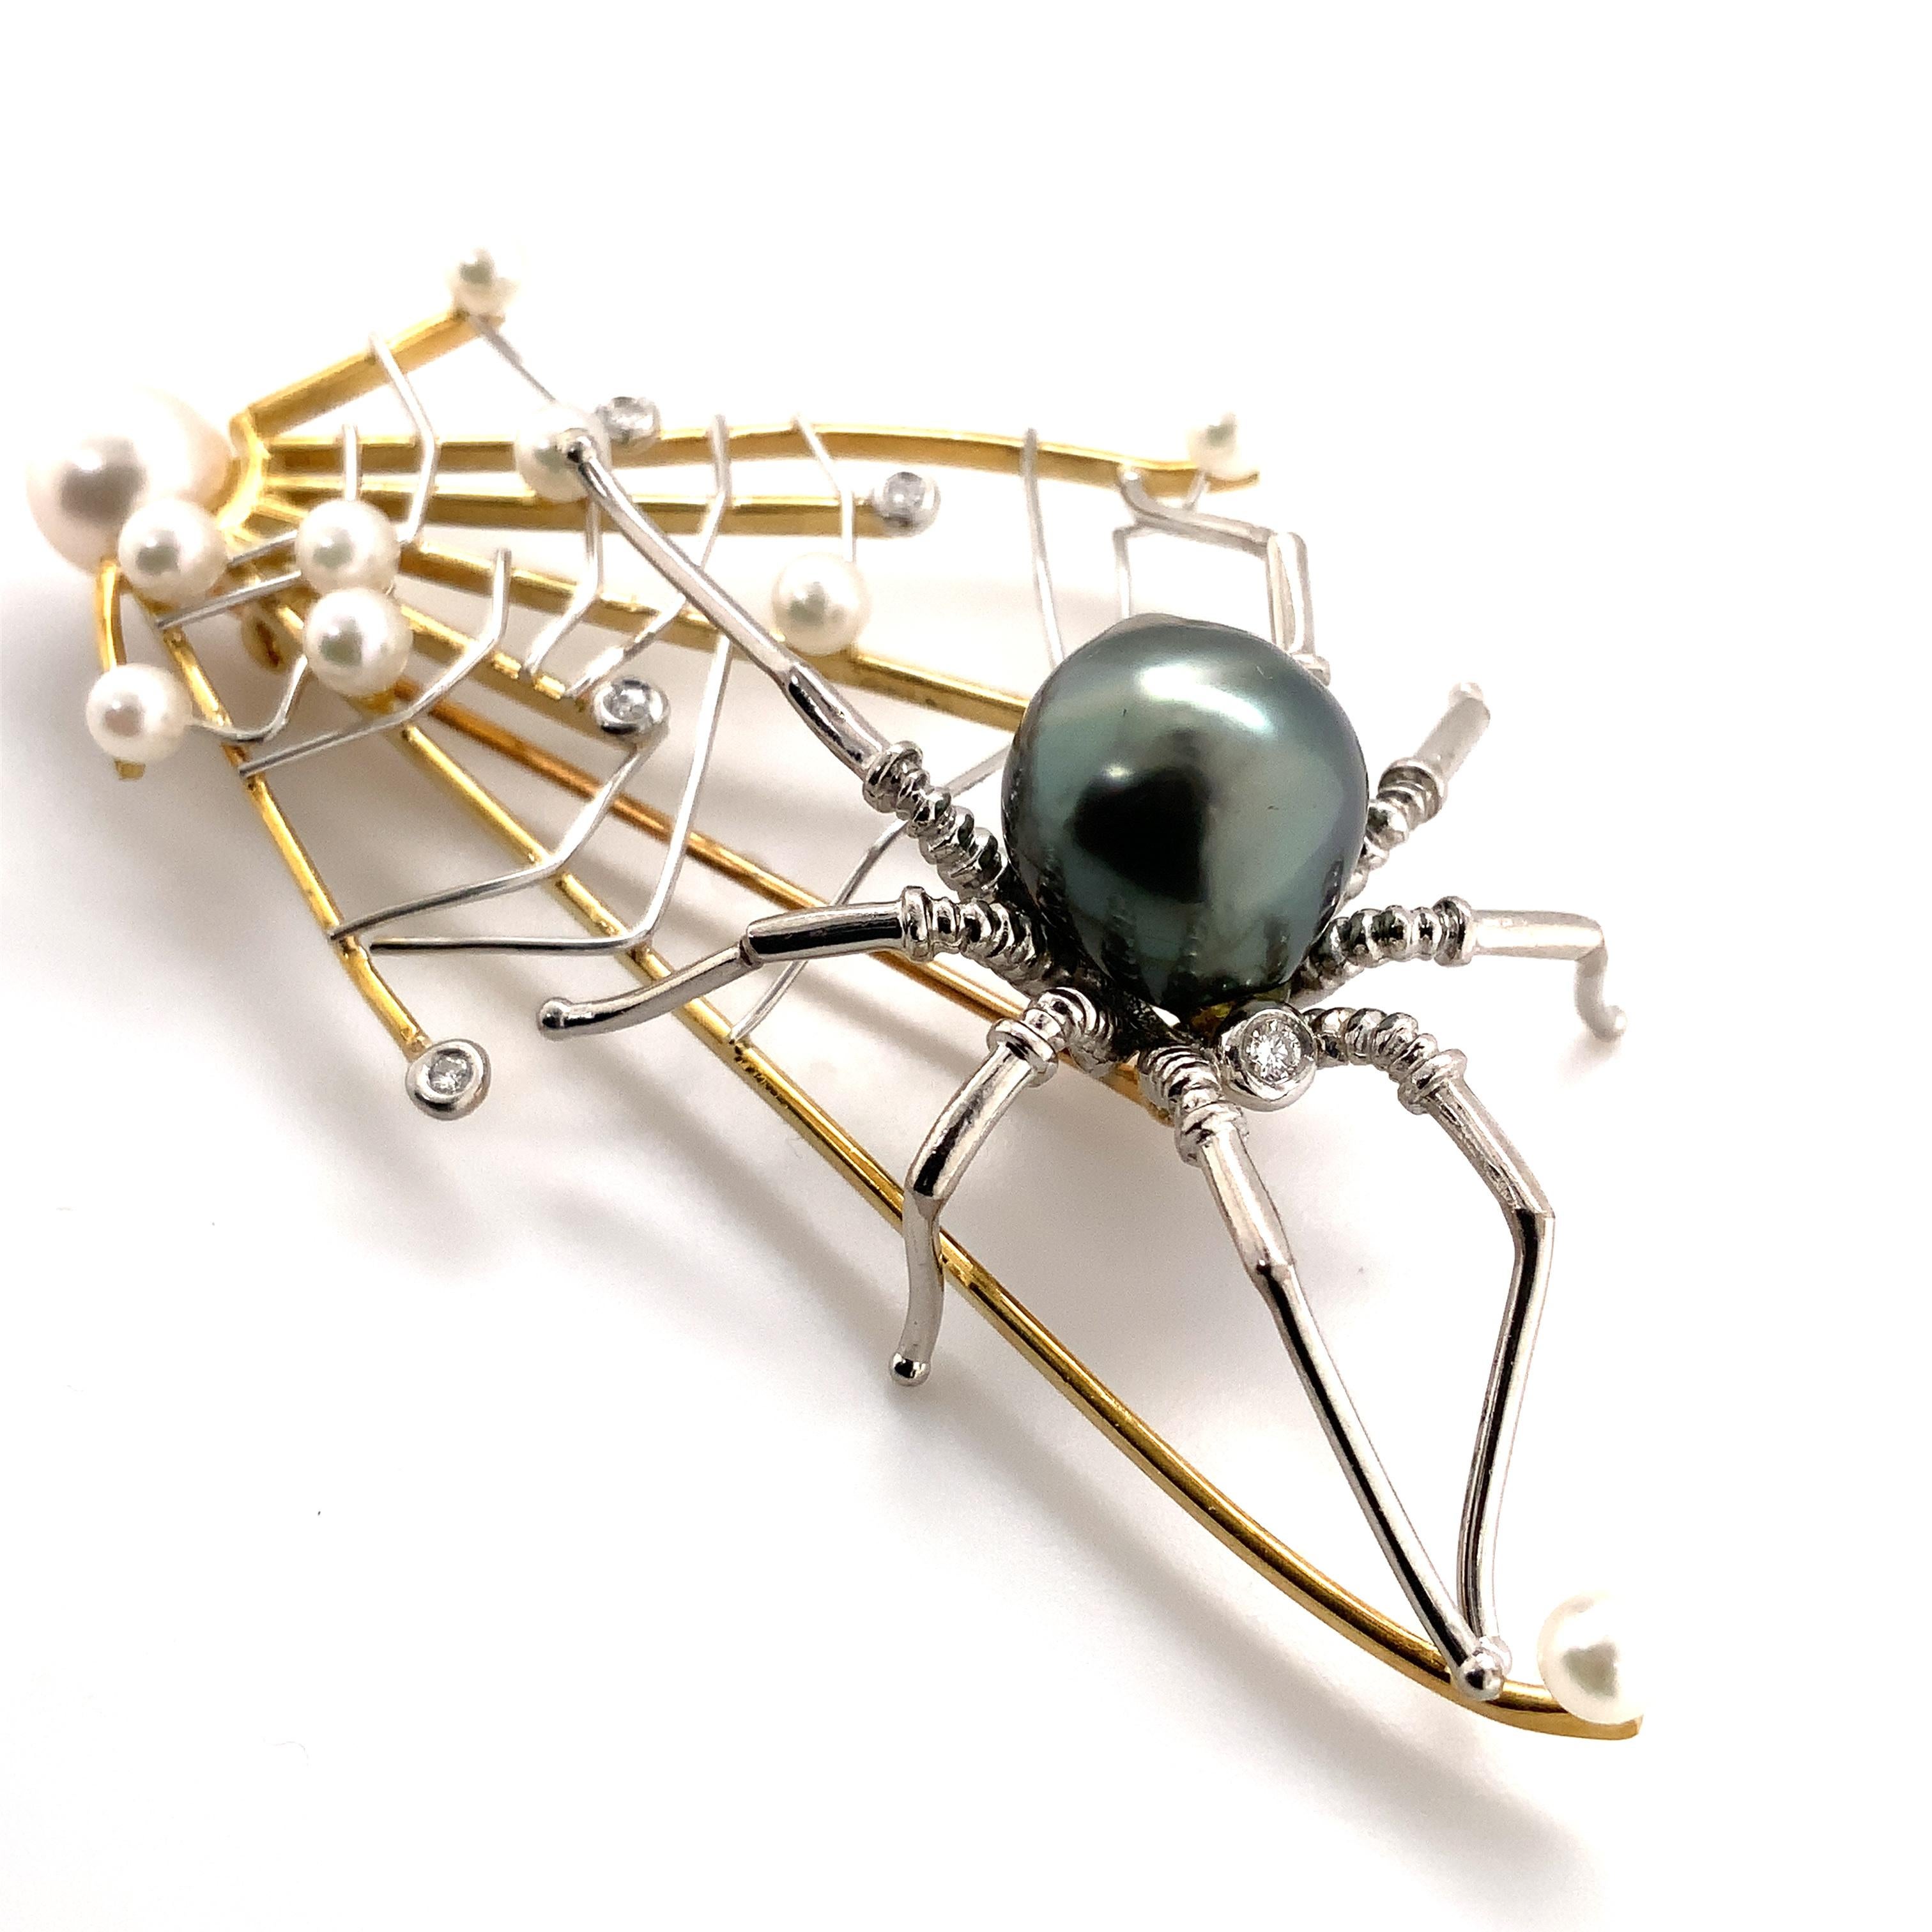 Alishan Limited edition Platinum and 18kt Gold Spider and the Web Pearl and Diamond Pendant / Pin. This Whimsical Design contains 10 White Akoya Pearls, One 11 mm Black Tahitian Pearl, and 6 Bezel set Diamonds.
6 = 0.18cts t.w. Brilliant Cut Round G